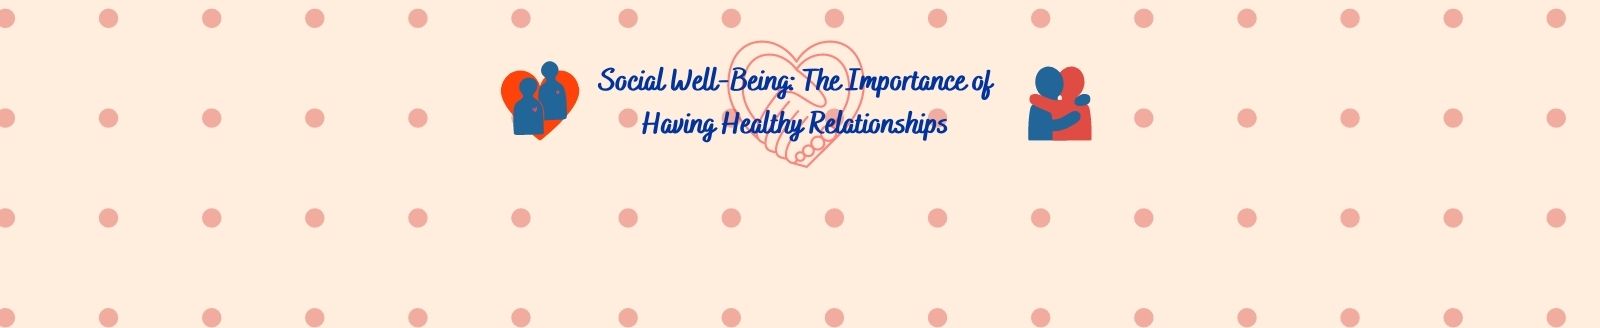 Social well being banner 